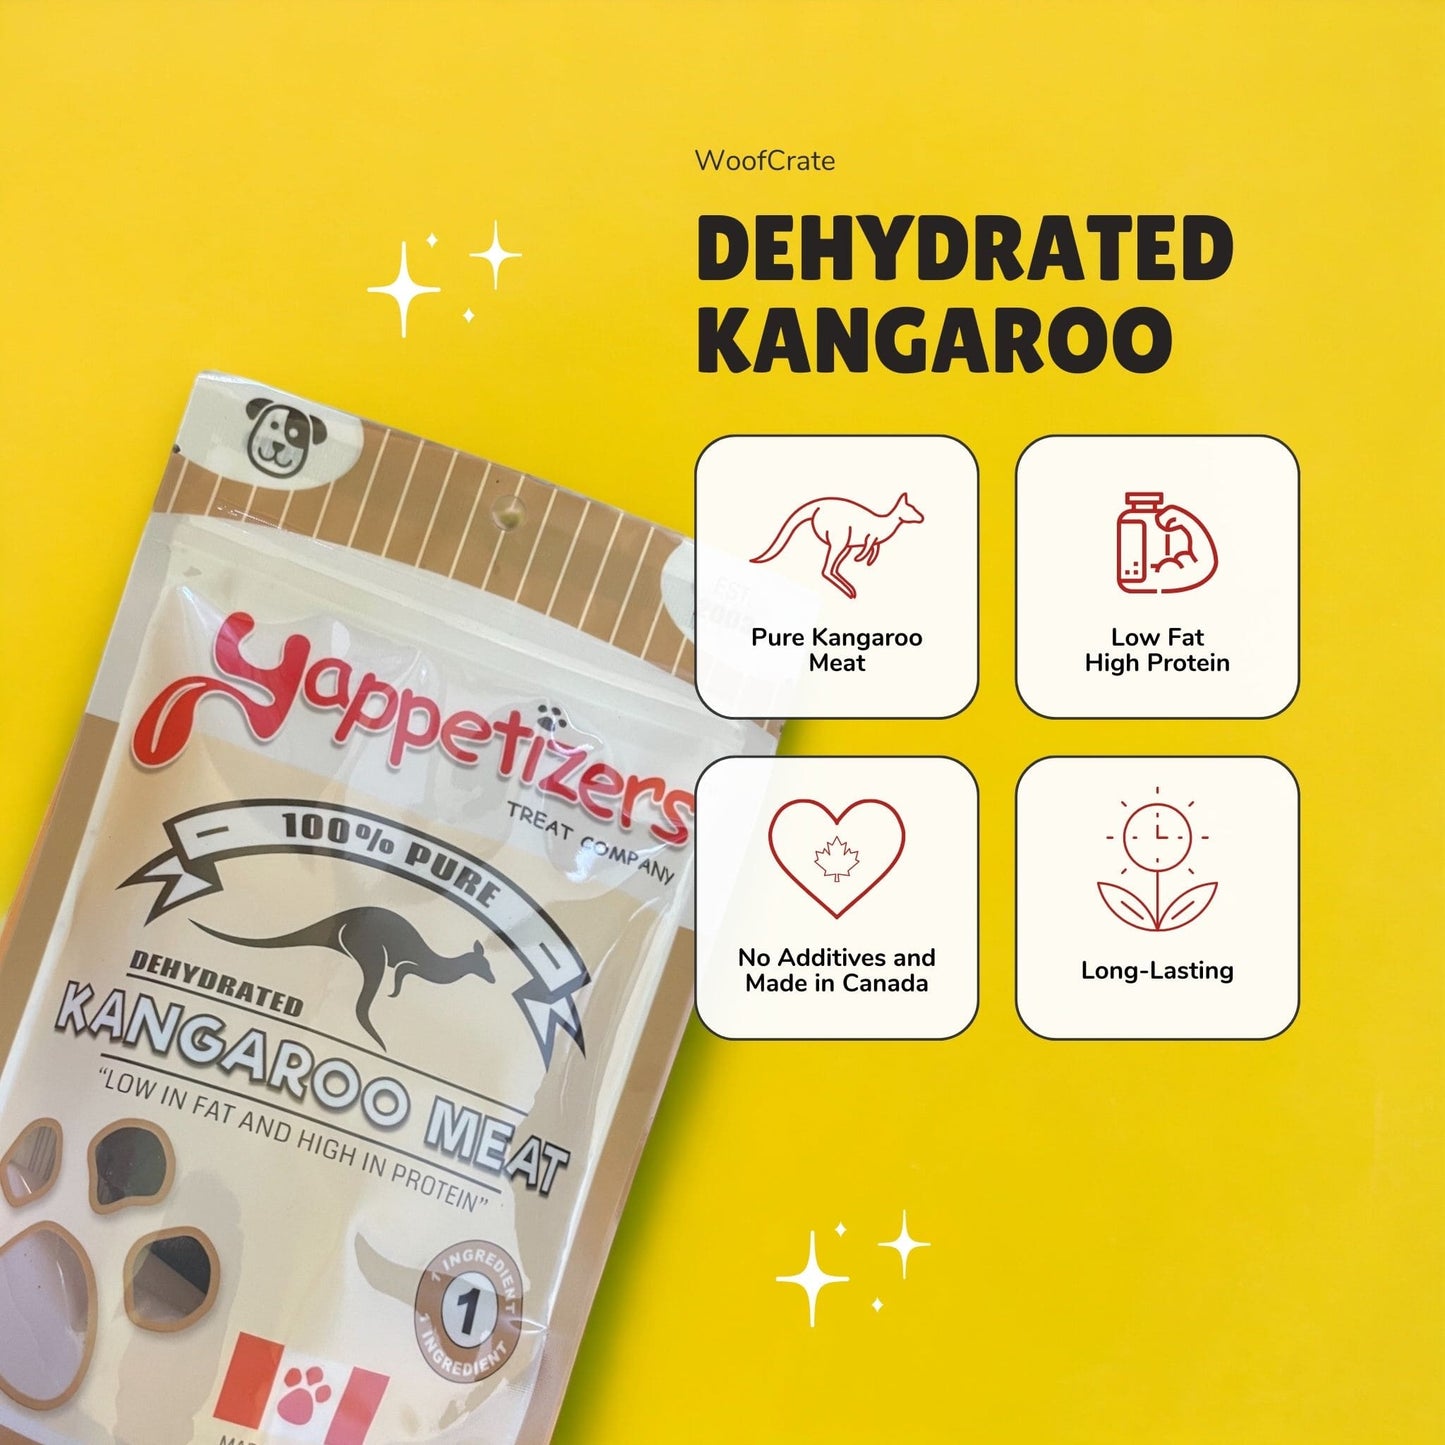 Benefits of dehydrated kangaroo treats for dogs side by side with a bag of kangaroo dog treats. The benefits include being high in protein, having no additives, being made in Canada, and are long lasting.